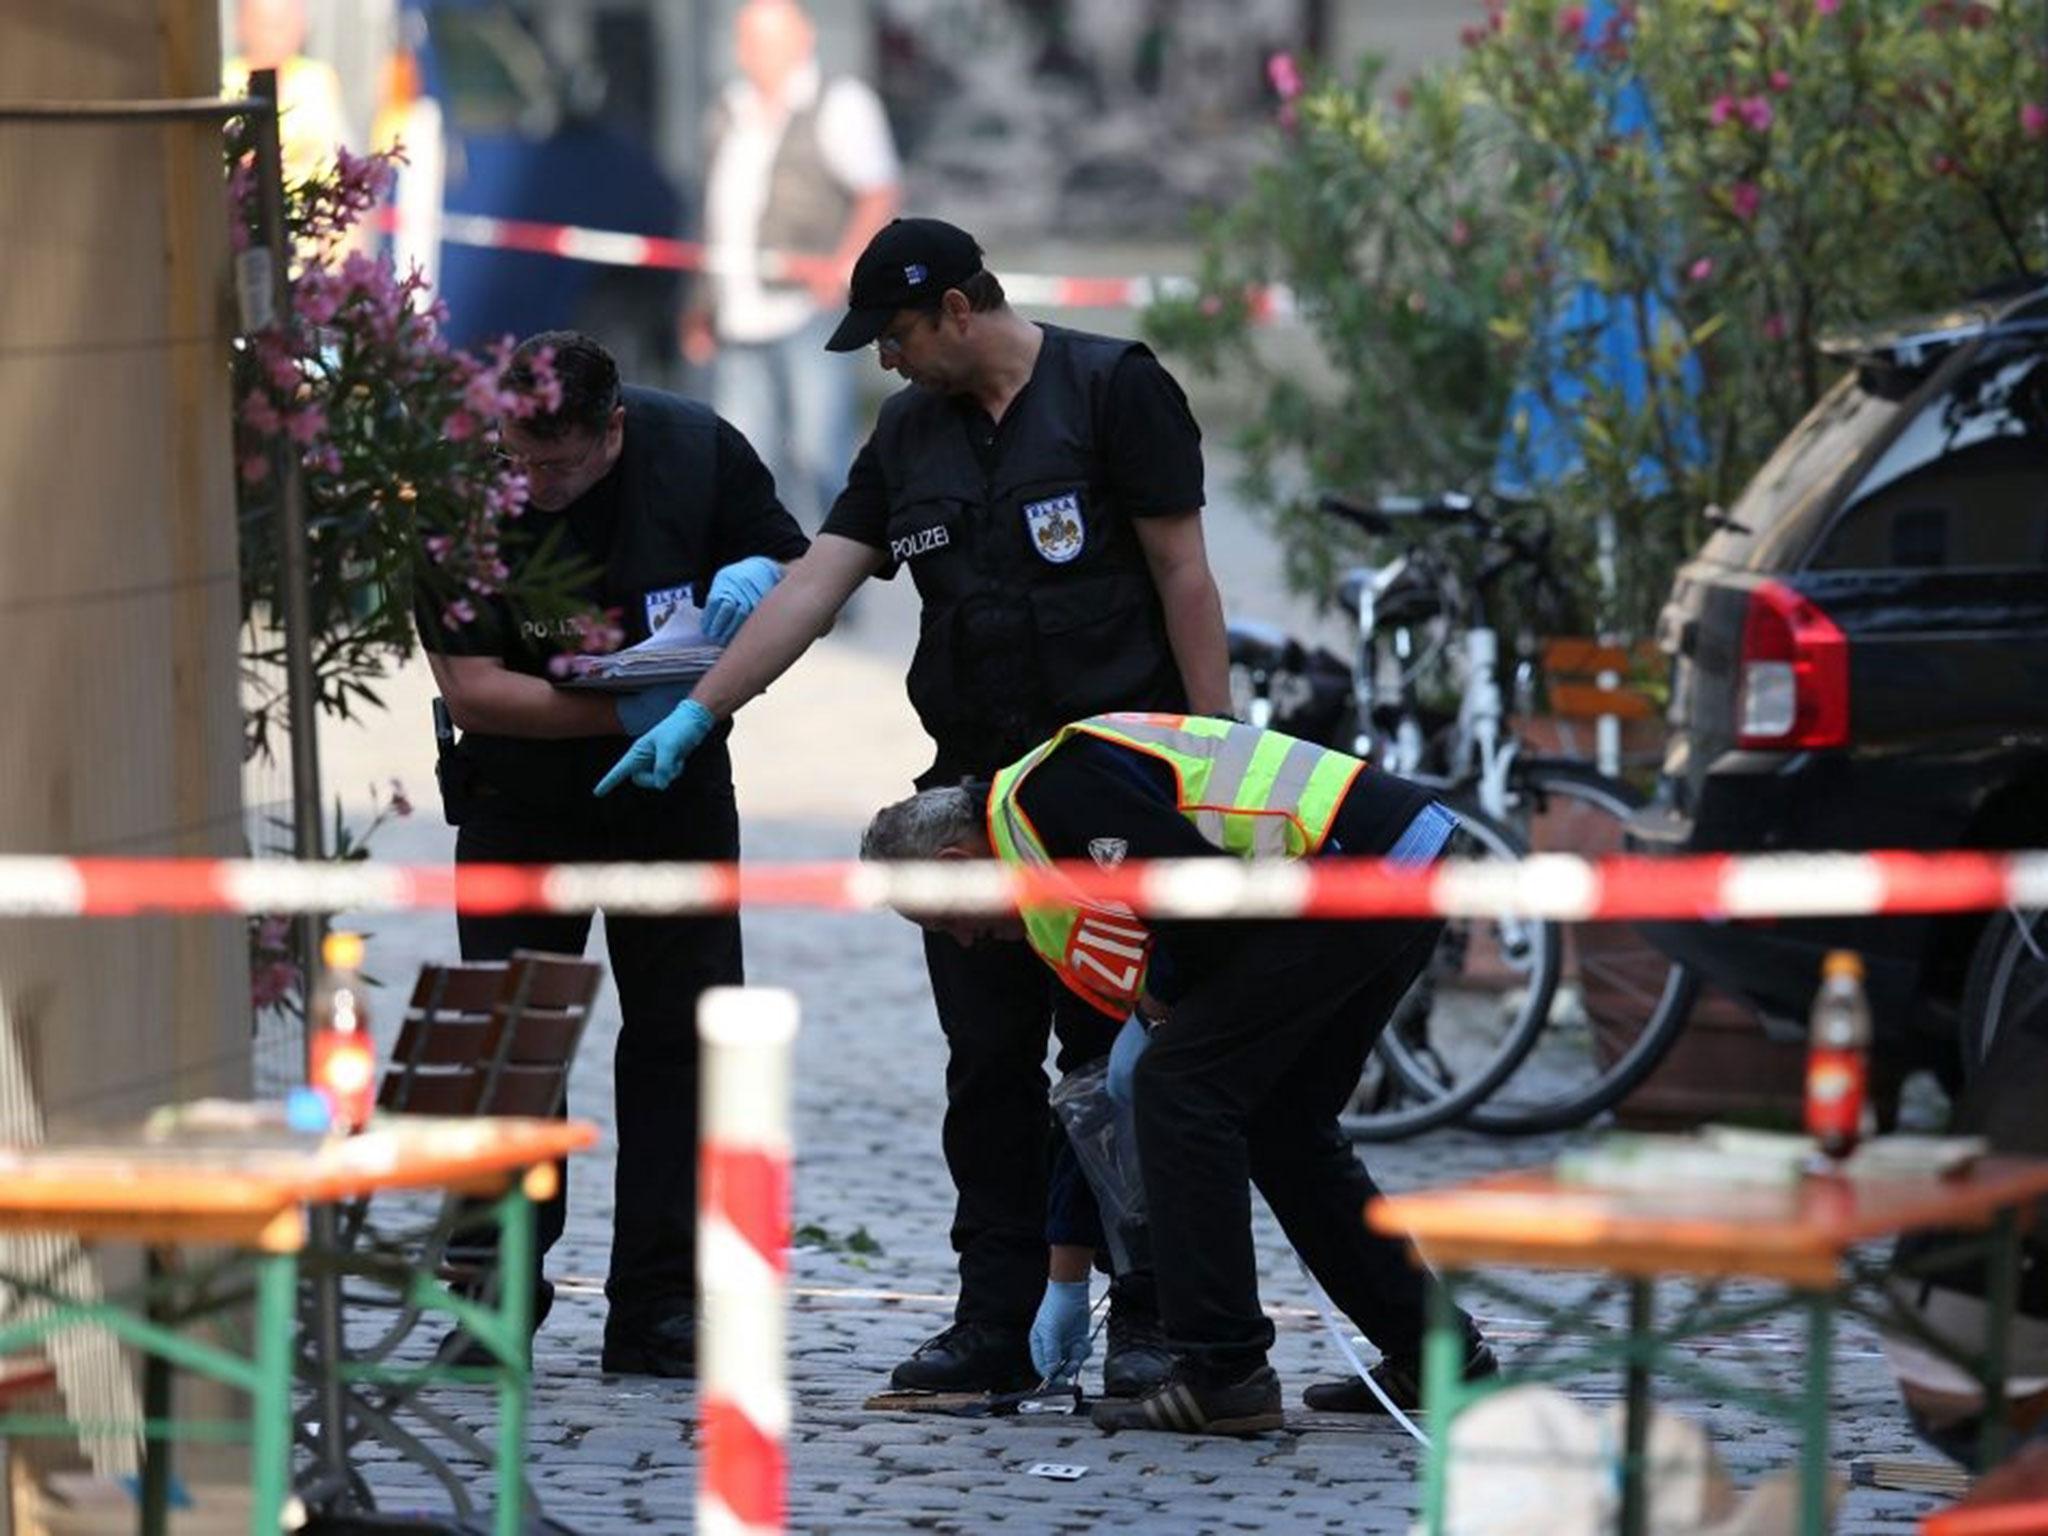 Police officers operate on a scene following an explosion in Ansbach, Germany, 25 July, 2016